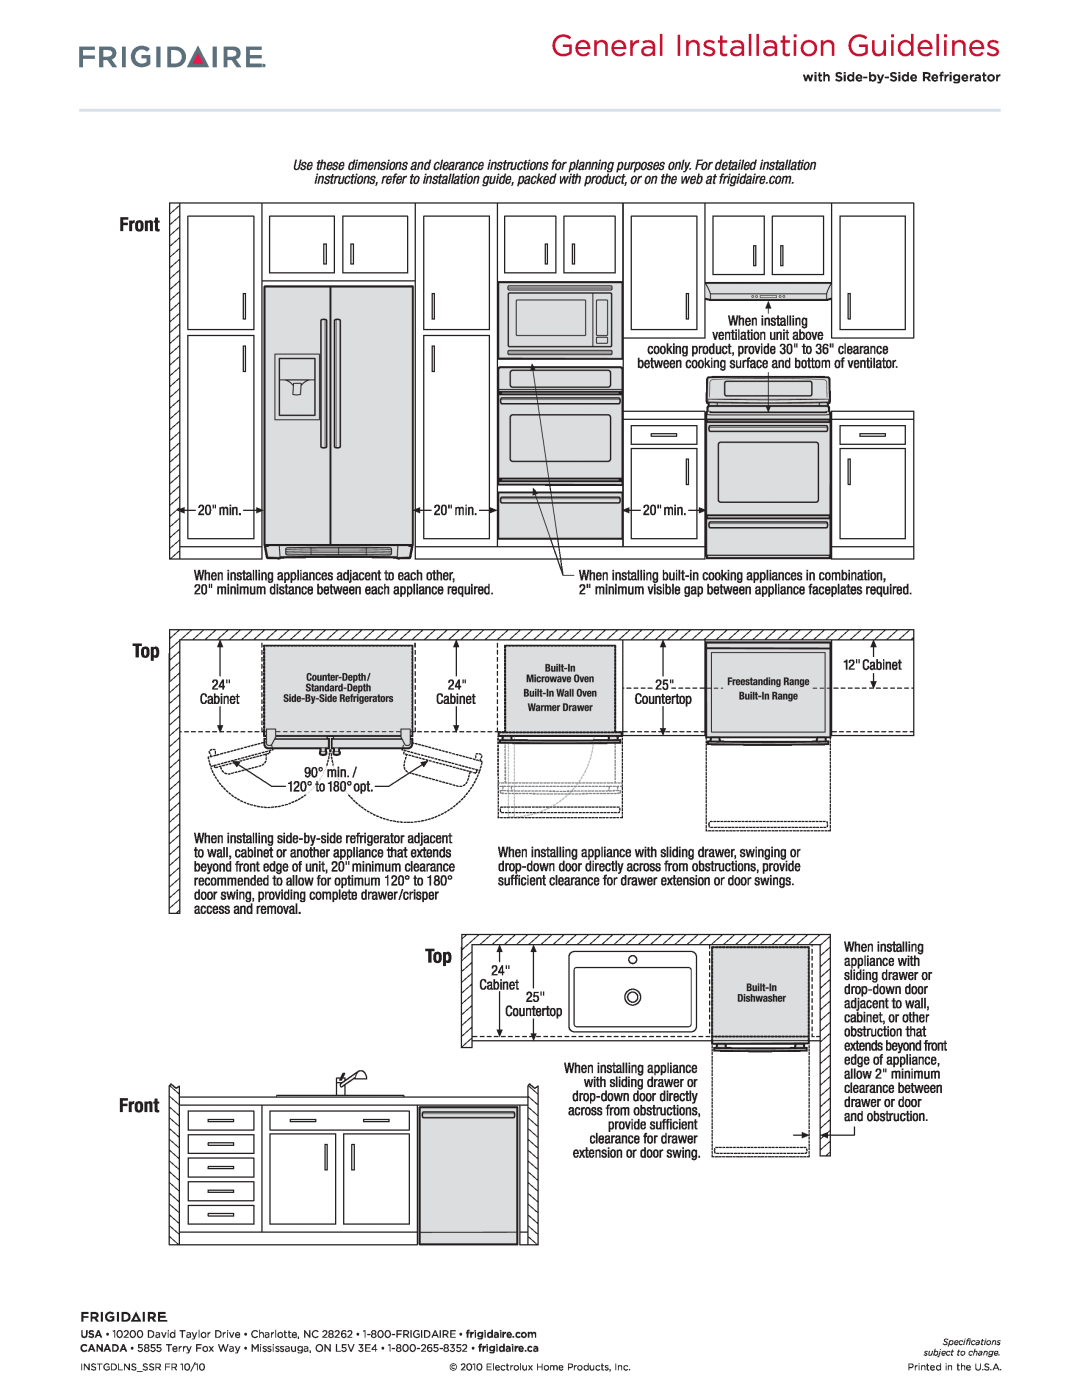 Frigidaire FGHS2342L F dimensions General Installation Guidelines, Top Front 